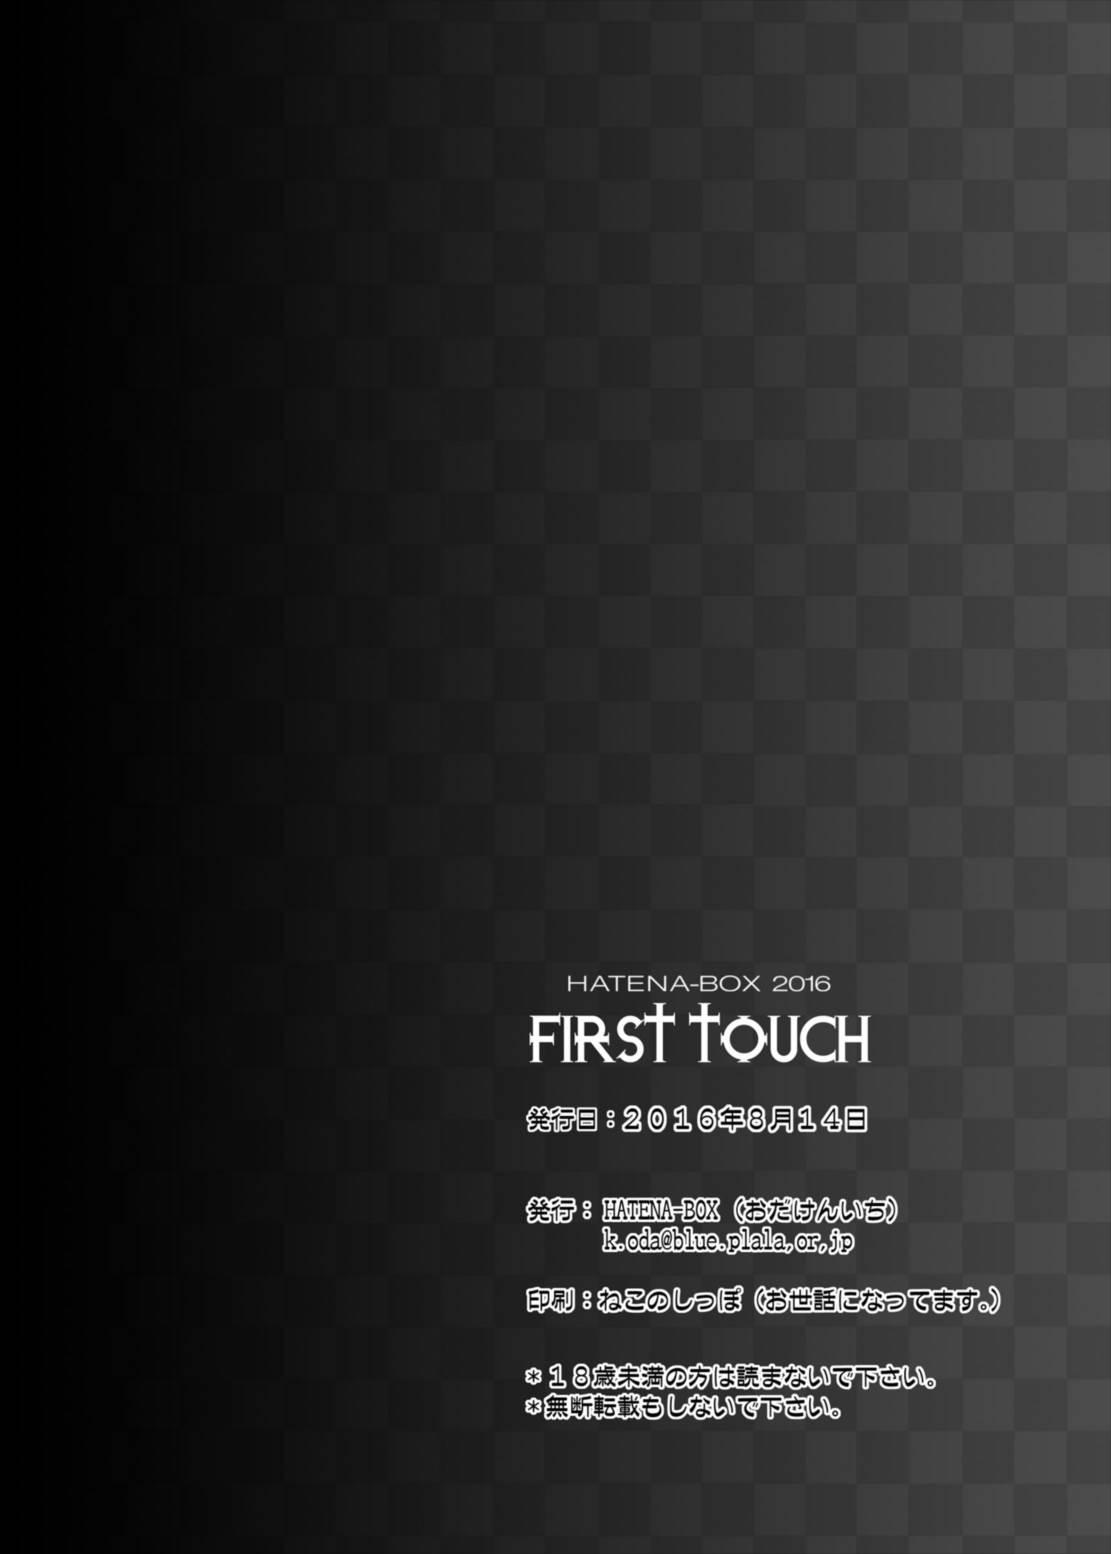 FIRST TOUCH 25